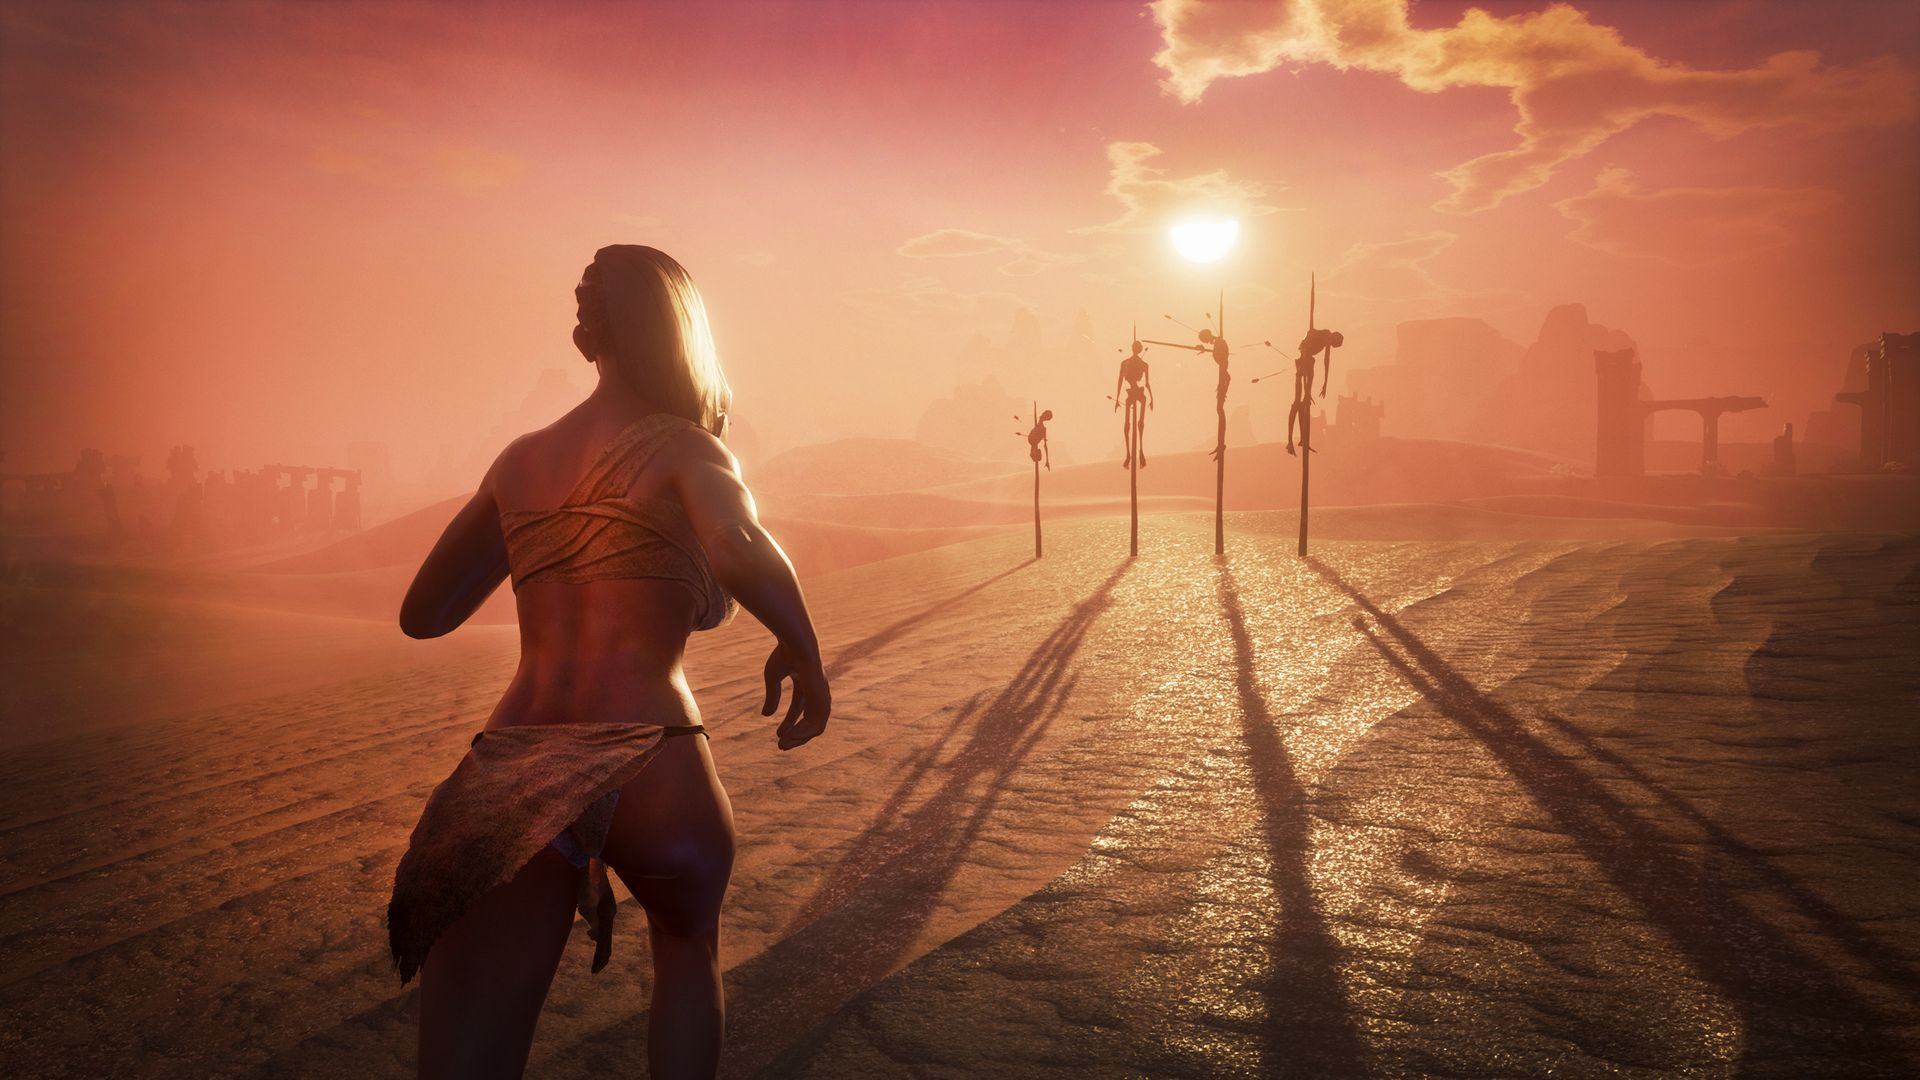 conan-exiles-improved-visuals-look-stunning-2